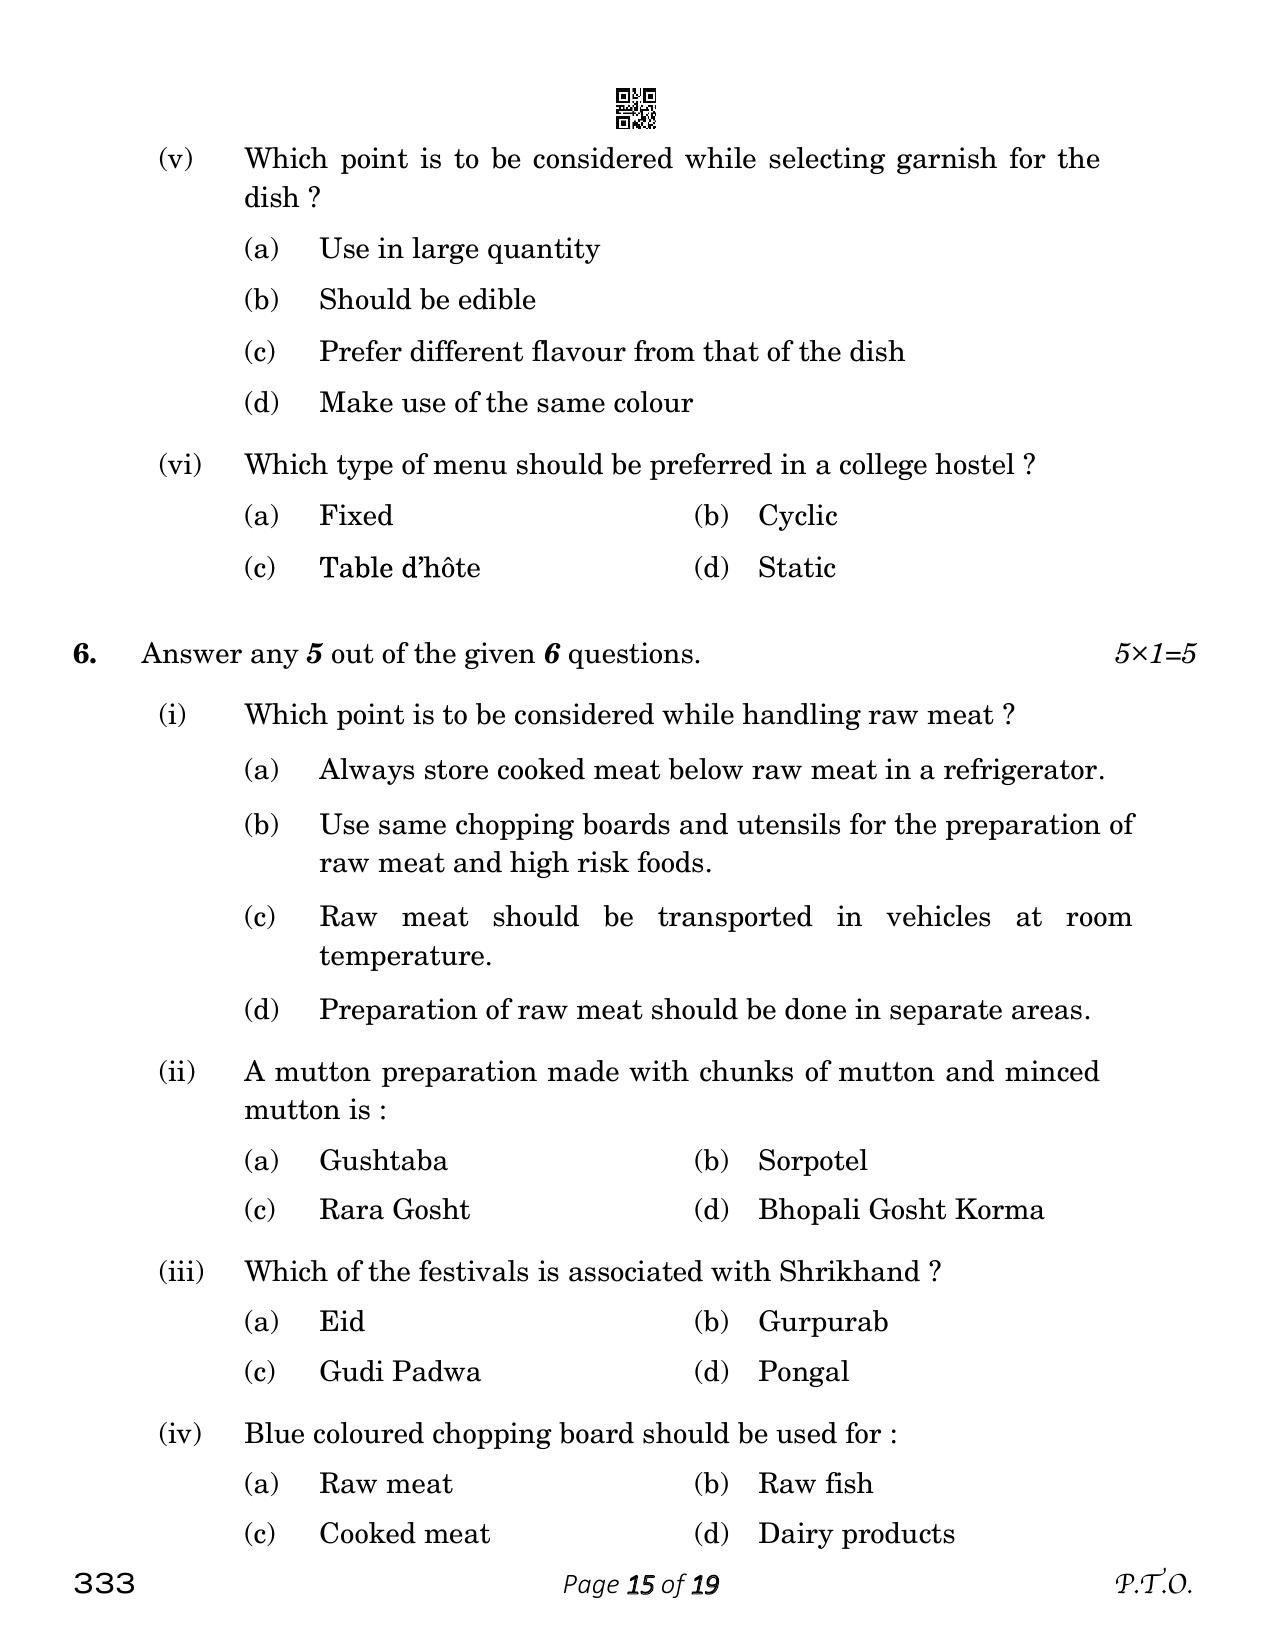 CBSE Class 12 food Production (Compartment) 2023 Question Paper - Page 15